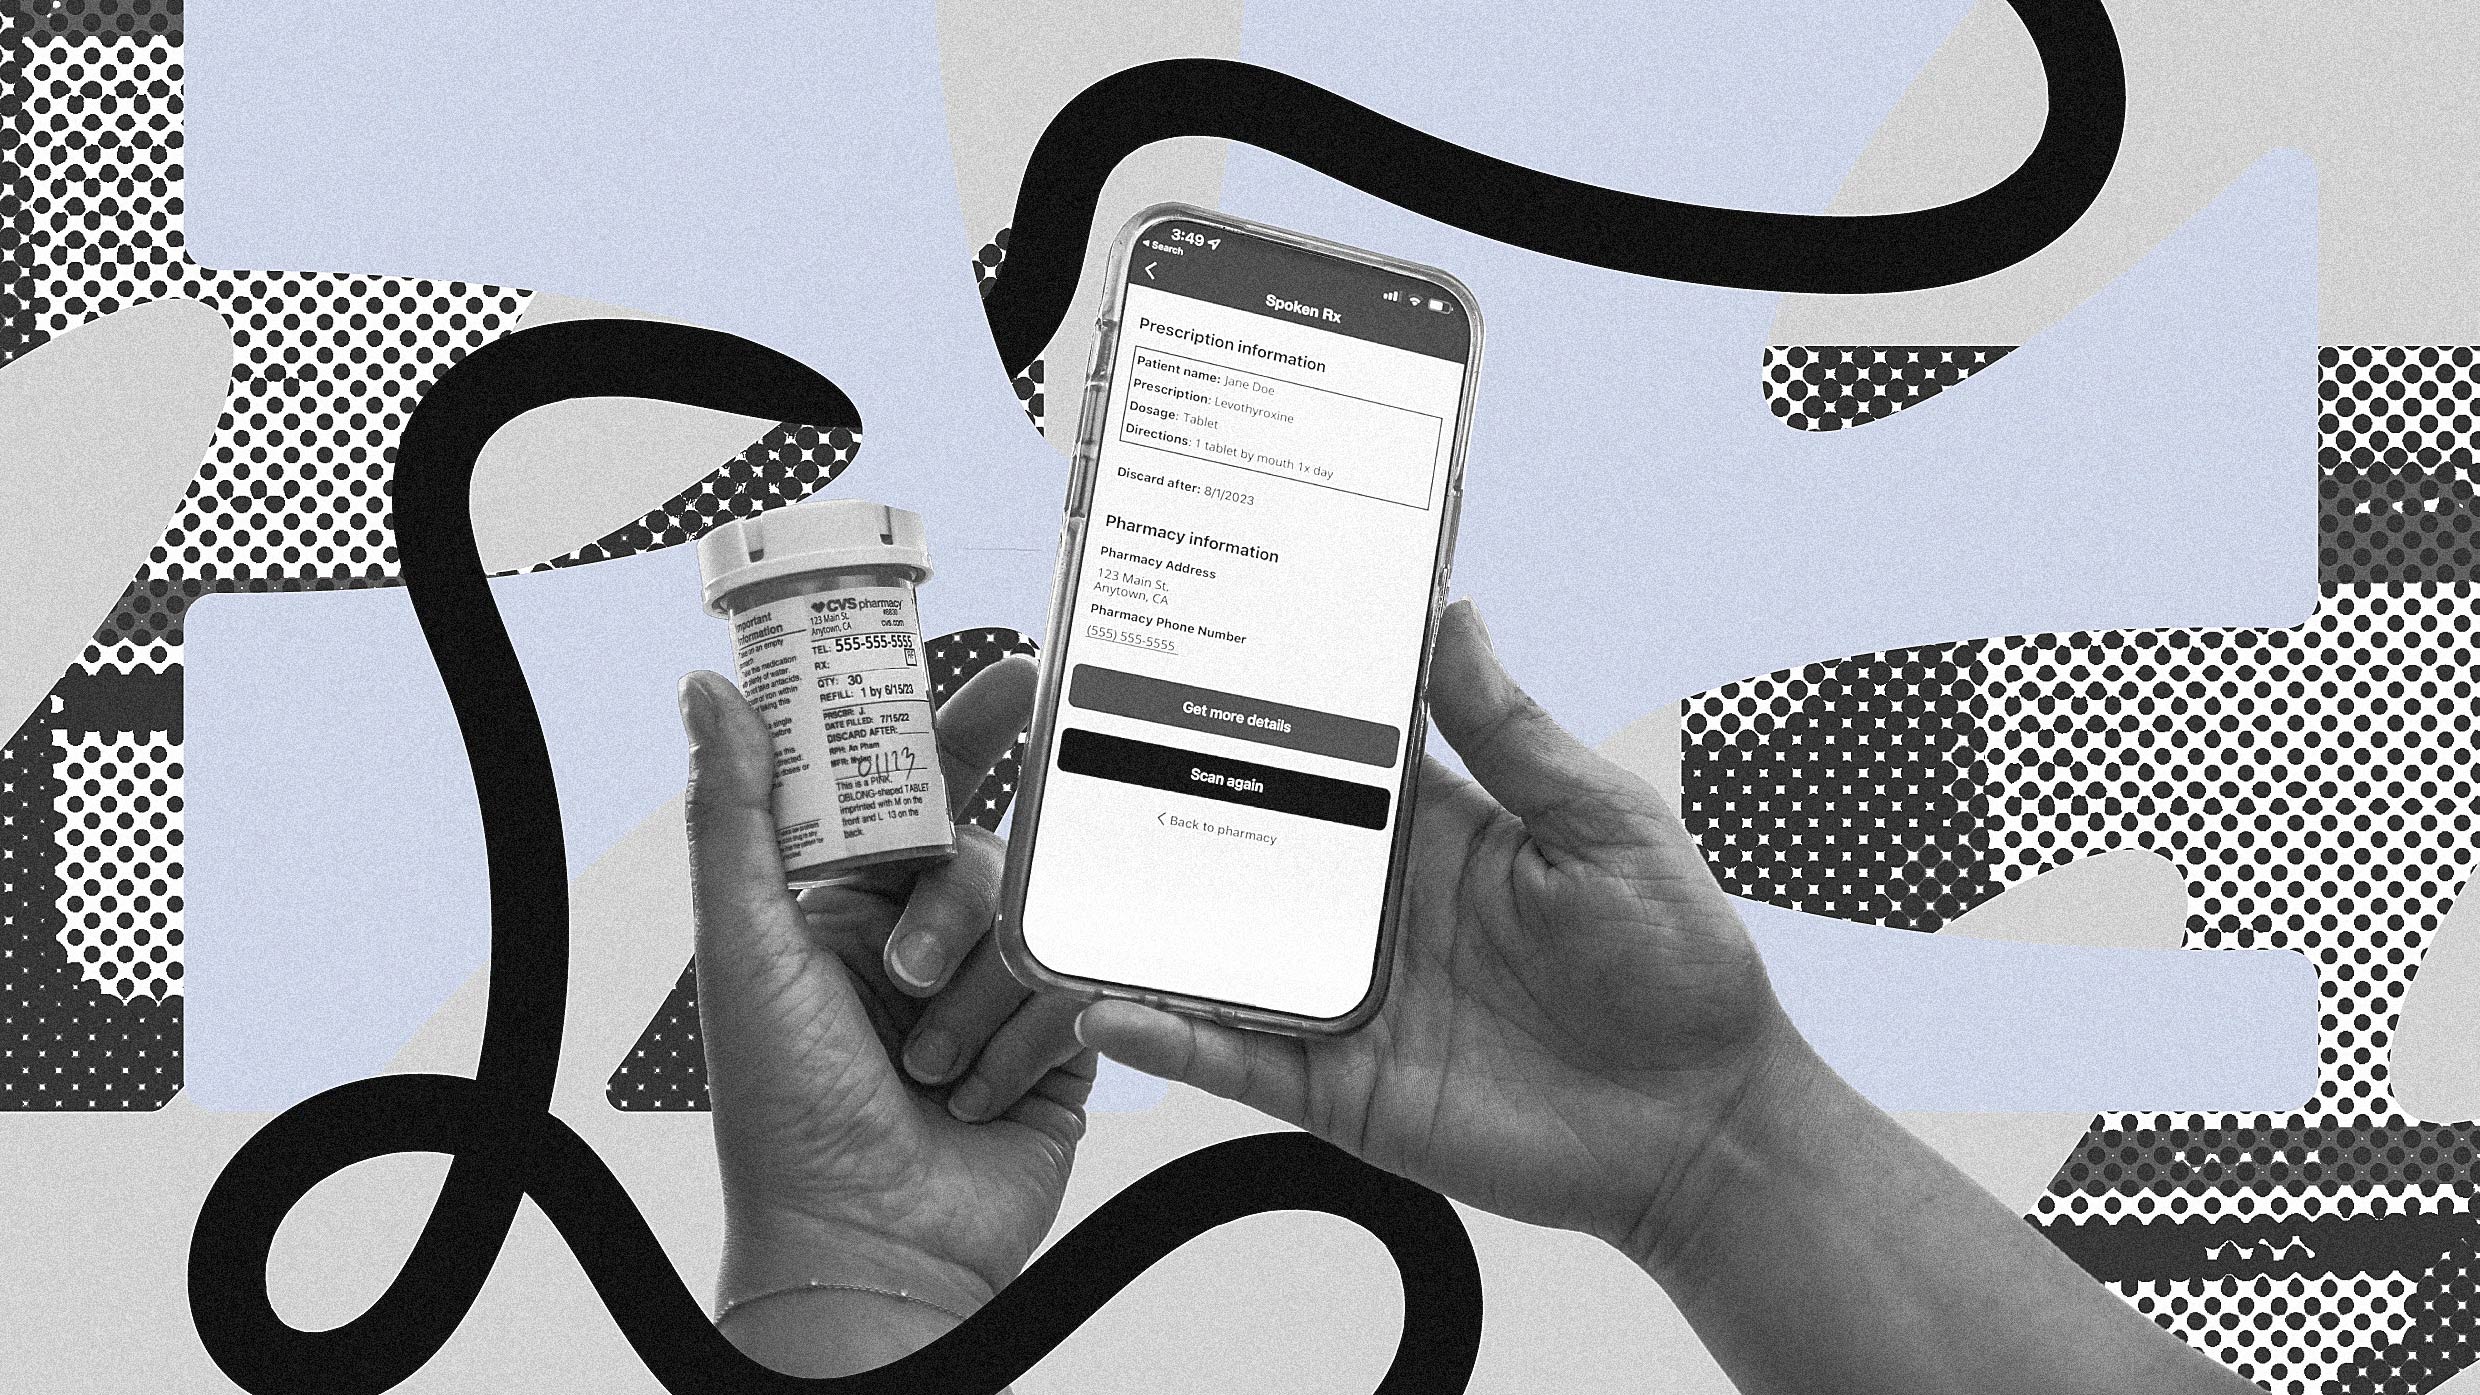 Fast Company: Prescription Bottles Can Be Incredibly Hard to Read. So This App Does It for You.